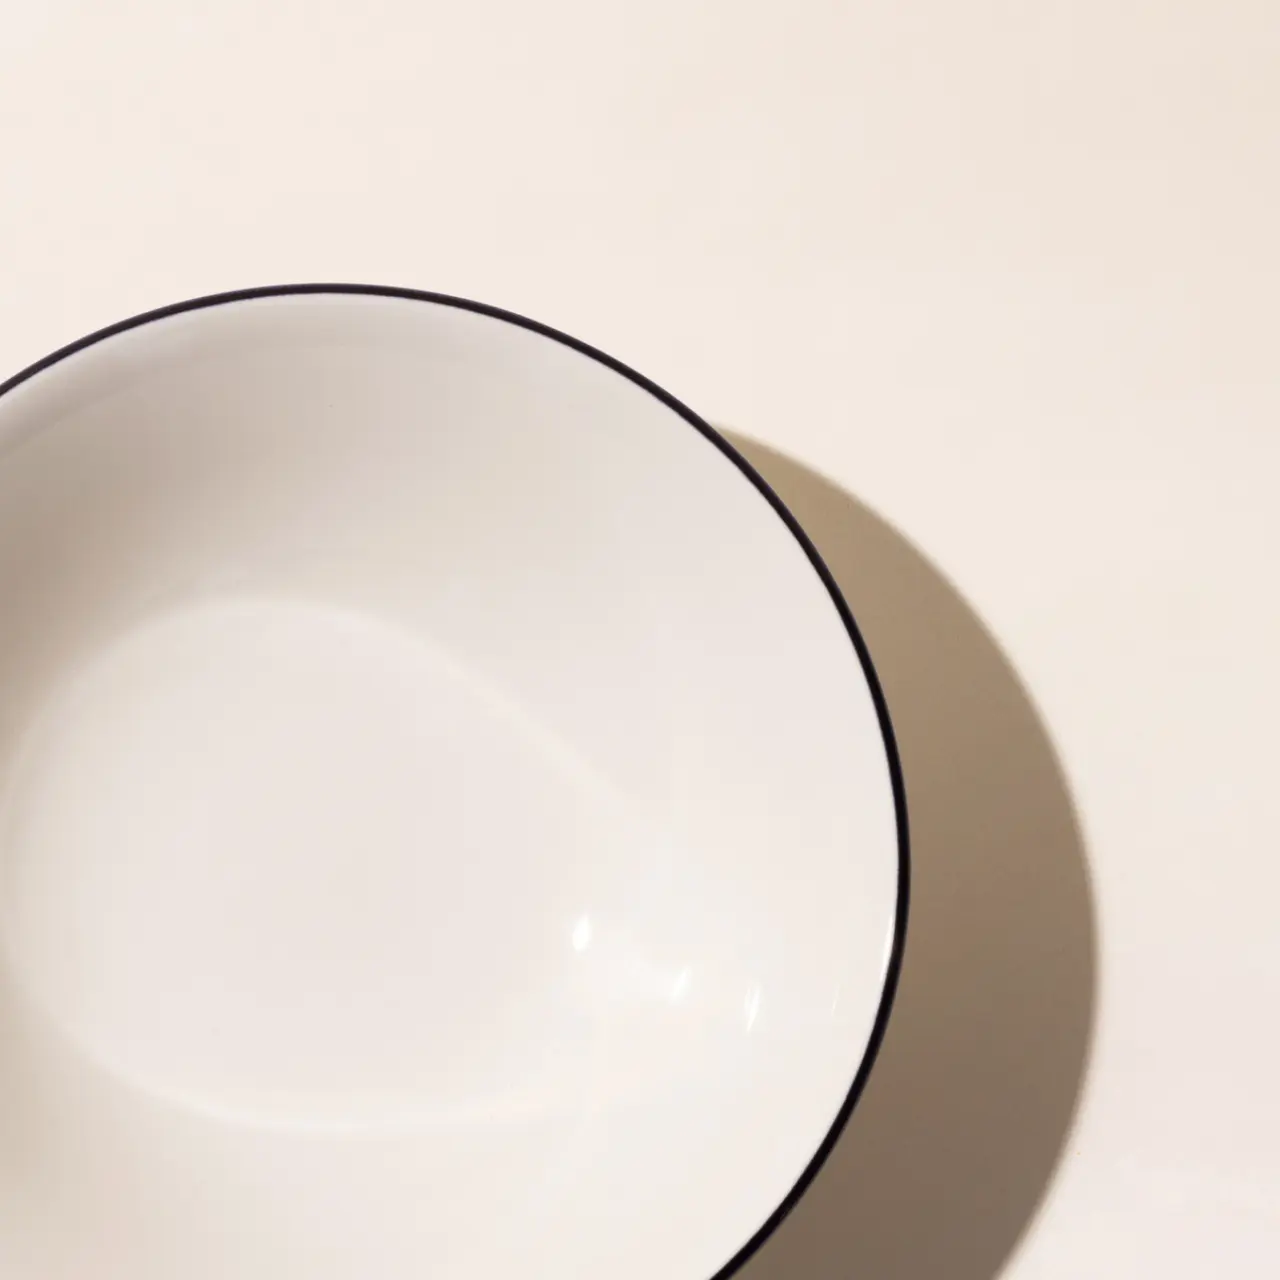 A simple white bowl with a blue rim, casting a shadow on a light surface.